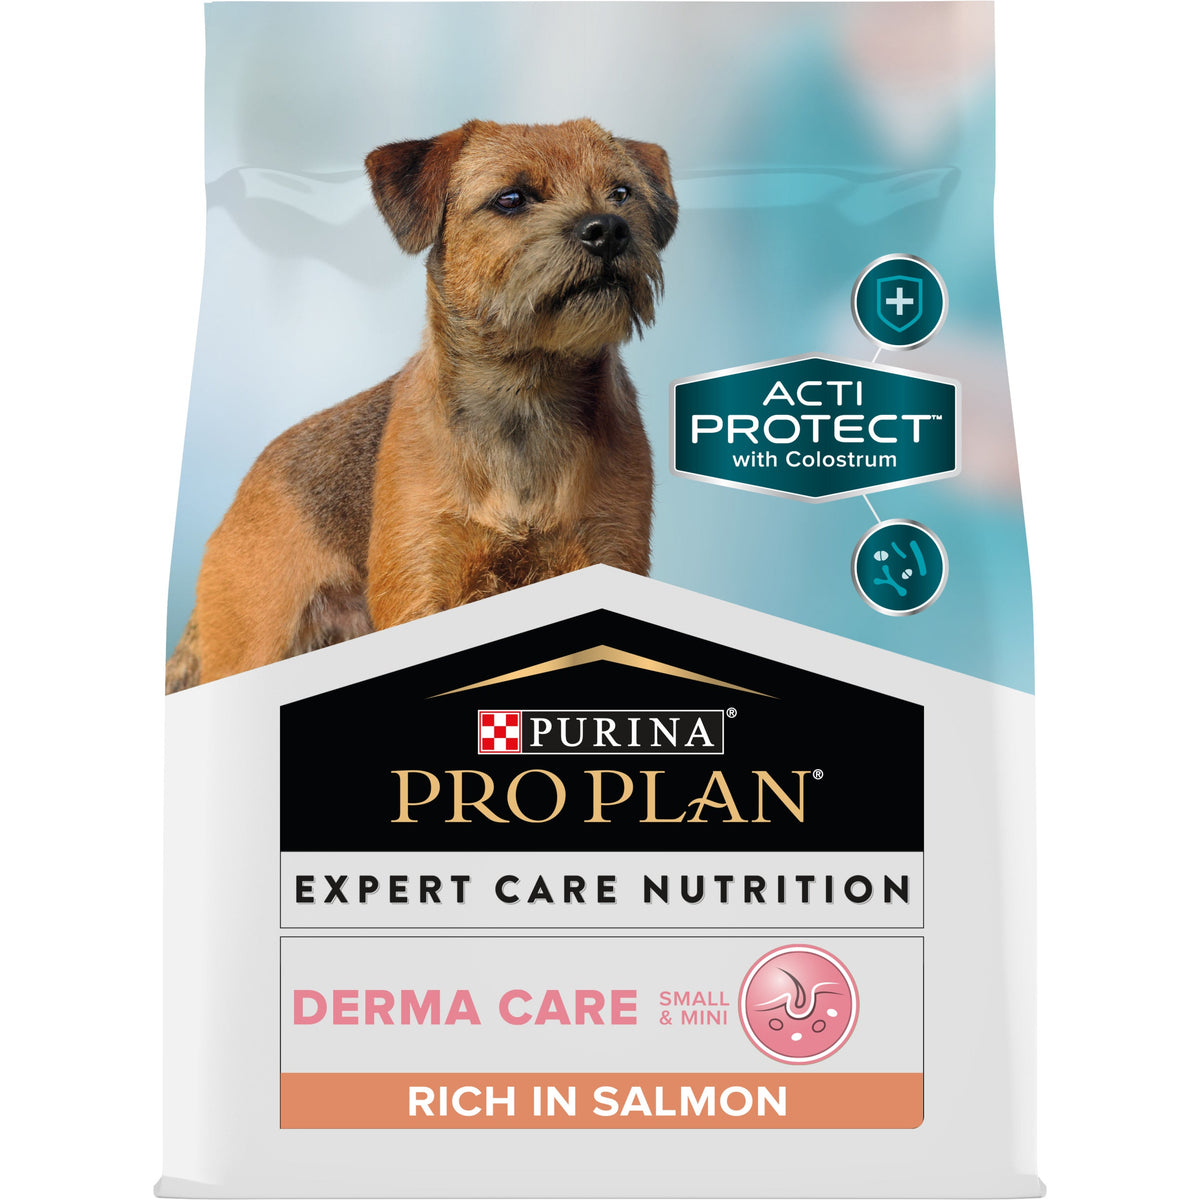 PURINA® PRO PLAN® Expert Care Nutrition - Canine Adult Small & Mini Derma Care - Salmon 7kg